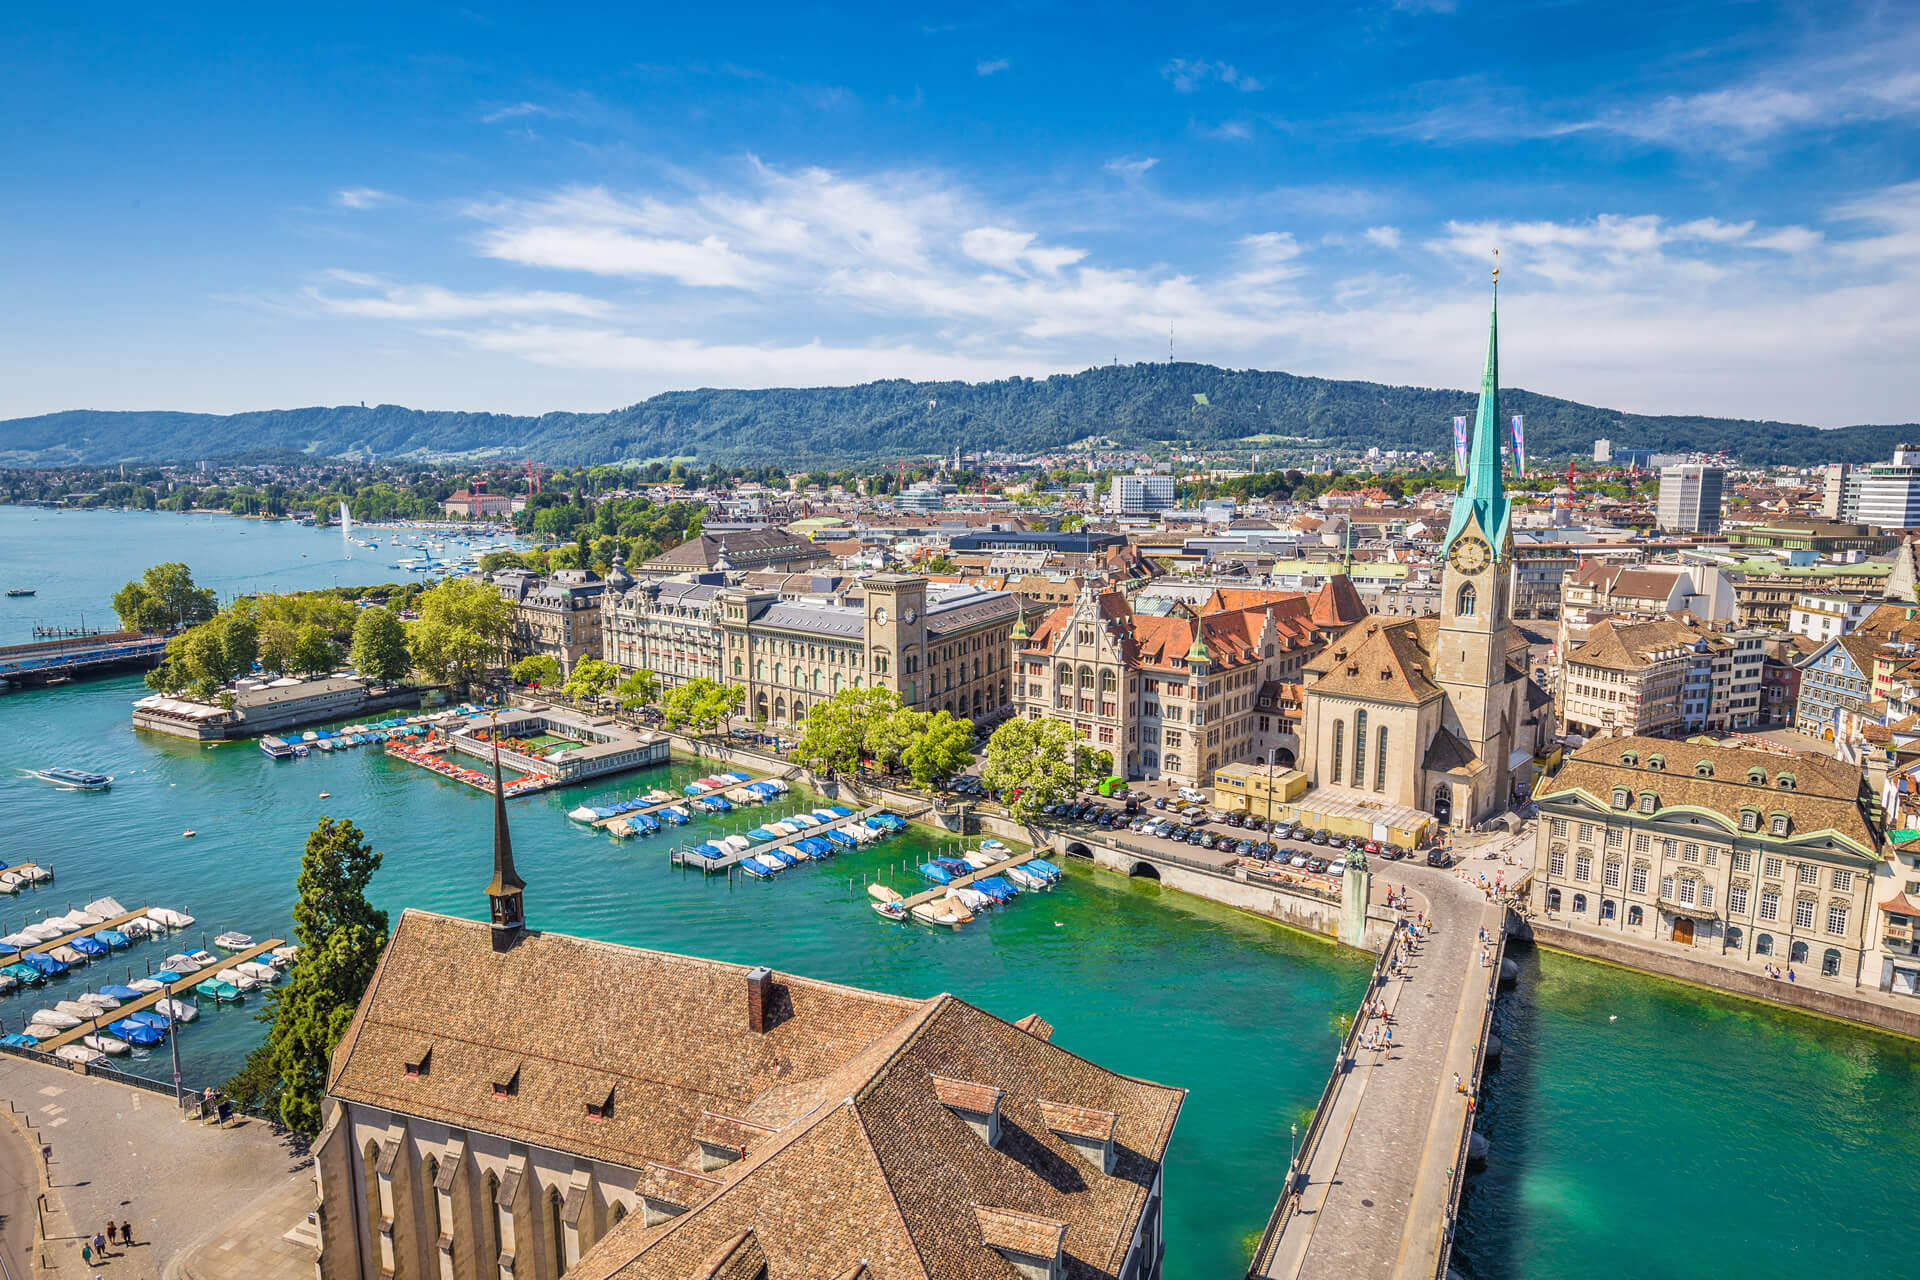 Fraumunster Church and river Limmat at Lake Zurich